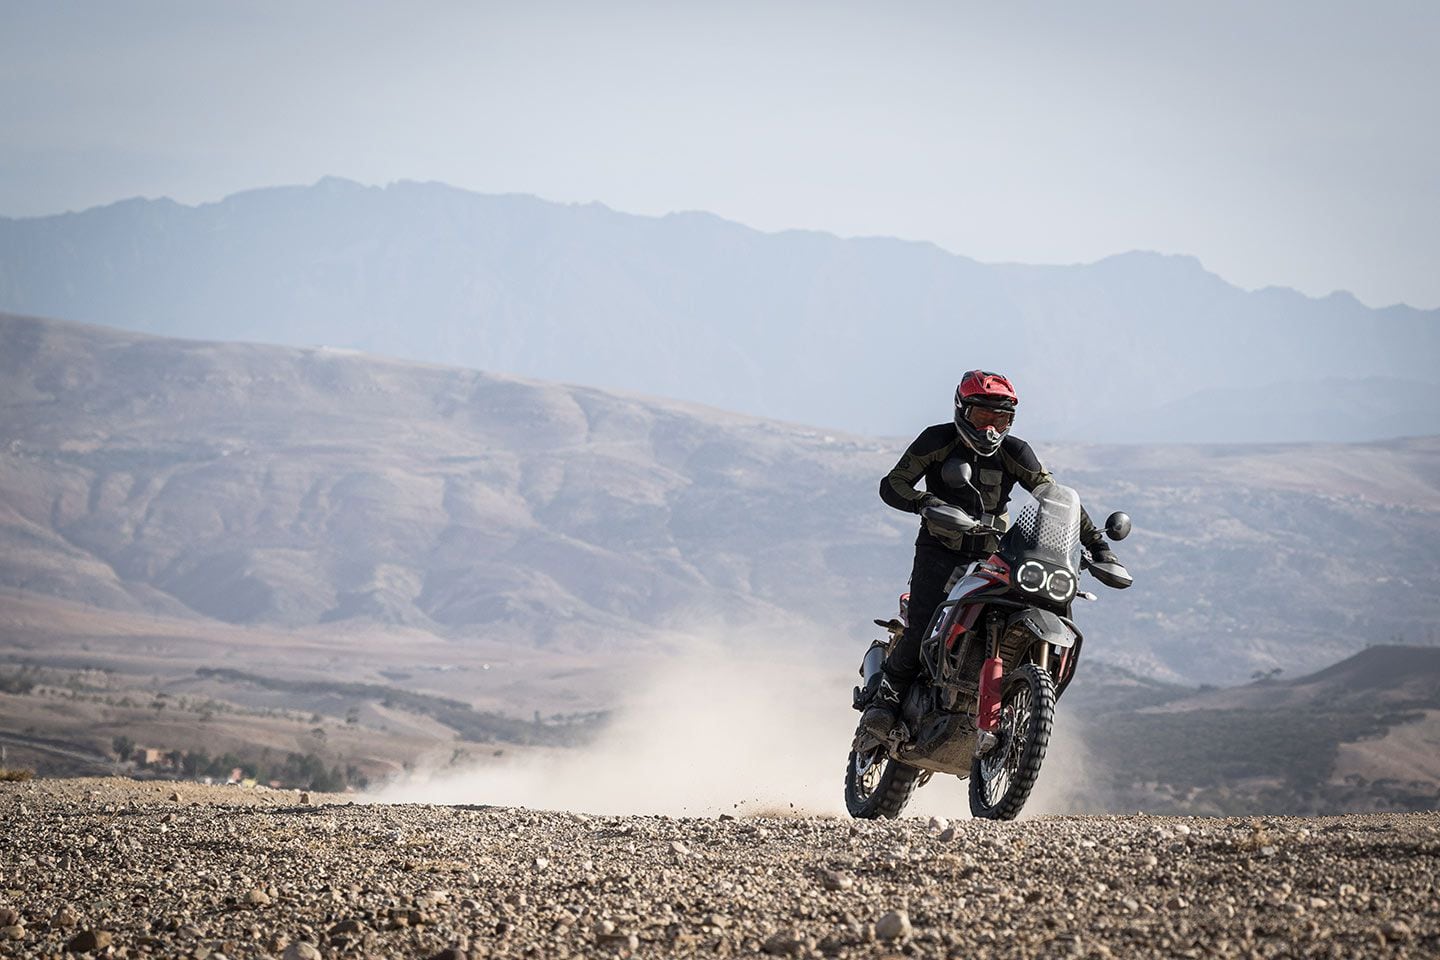 Changing modes is easy and quick, allowing the rider to stay focused on what’s ahead rather than what is on the dash.